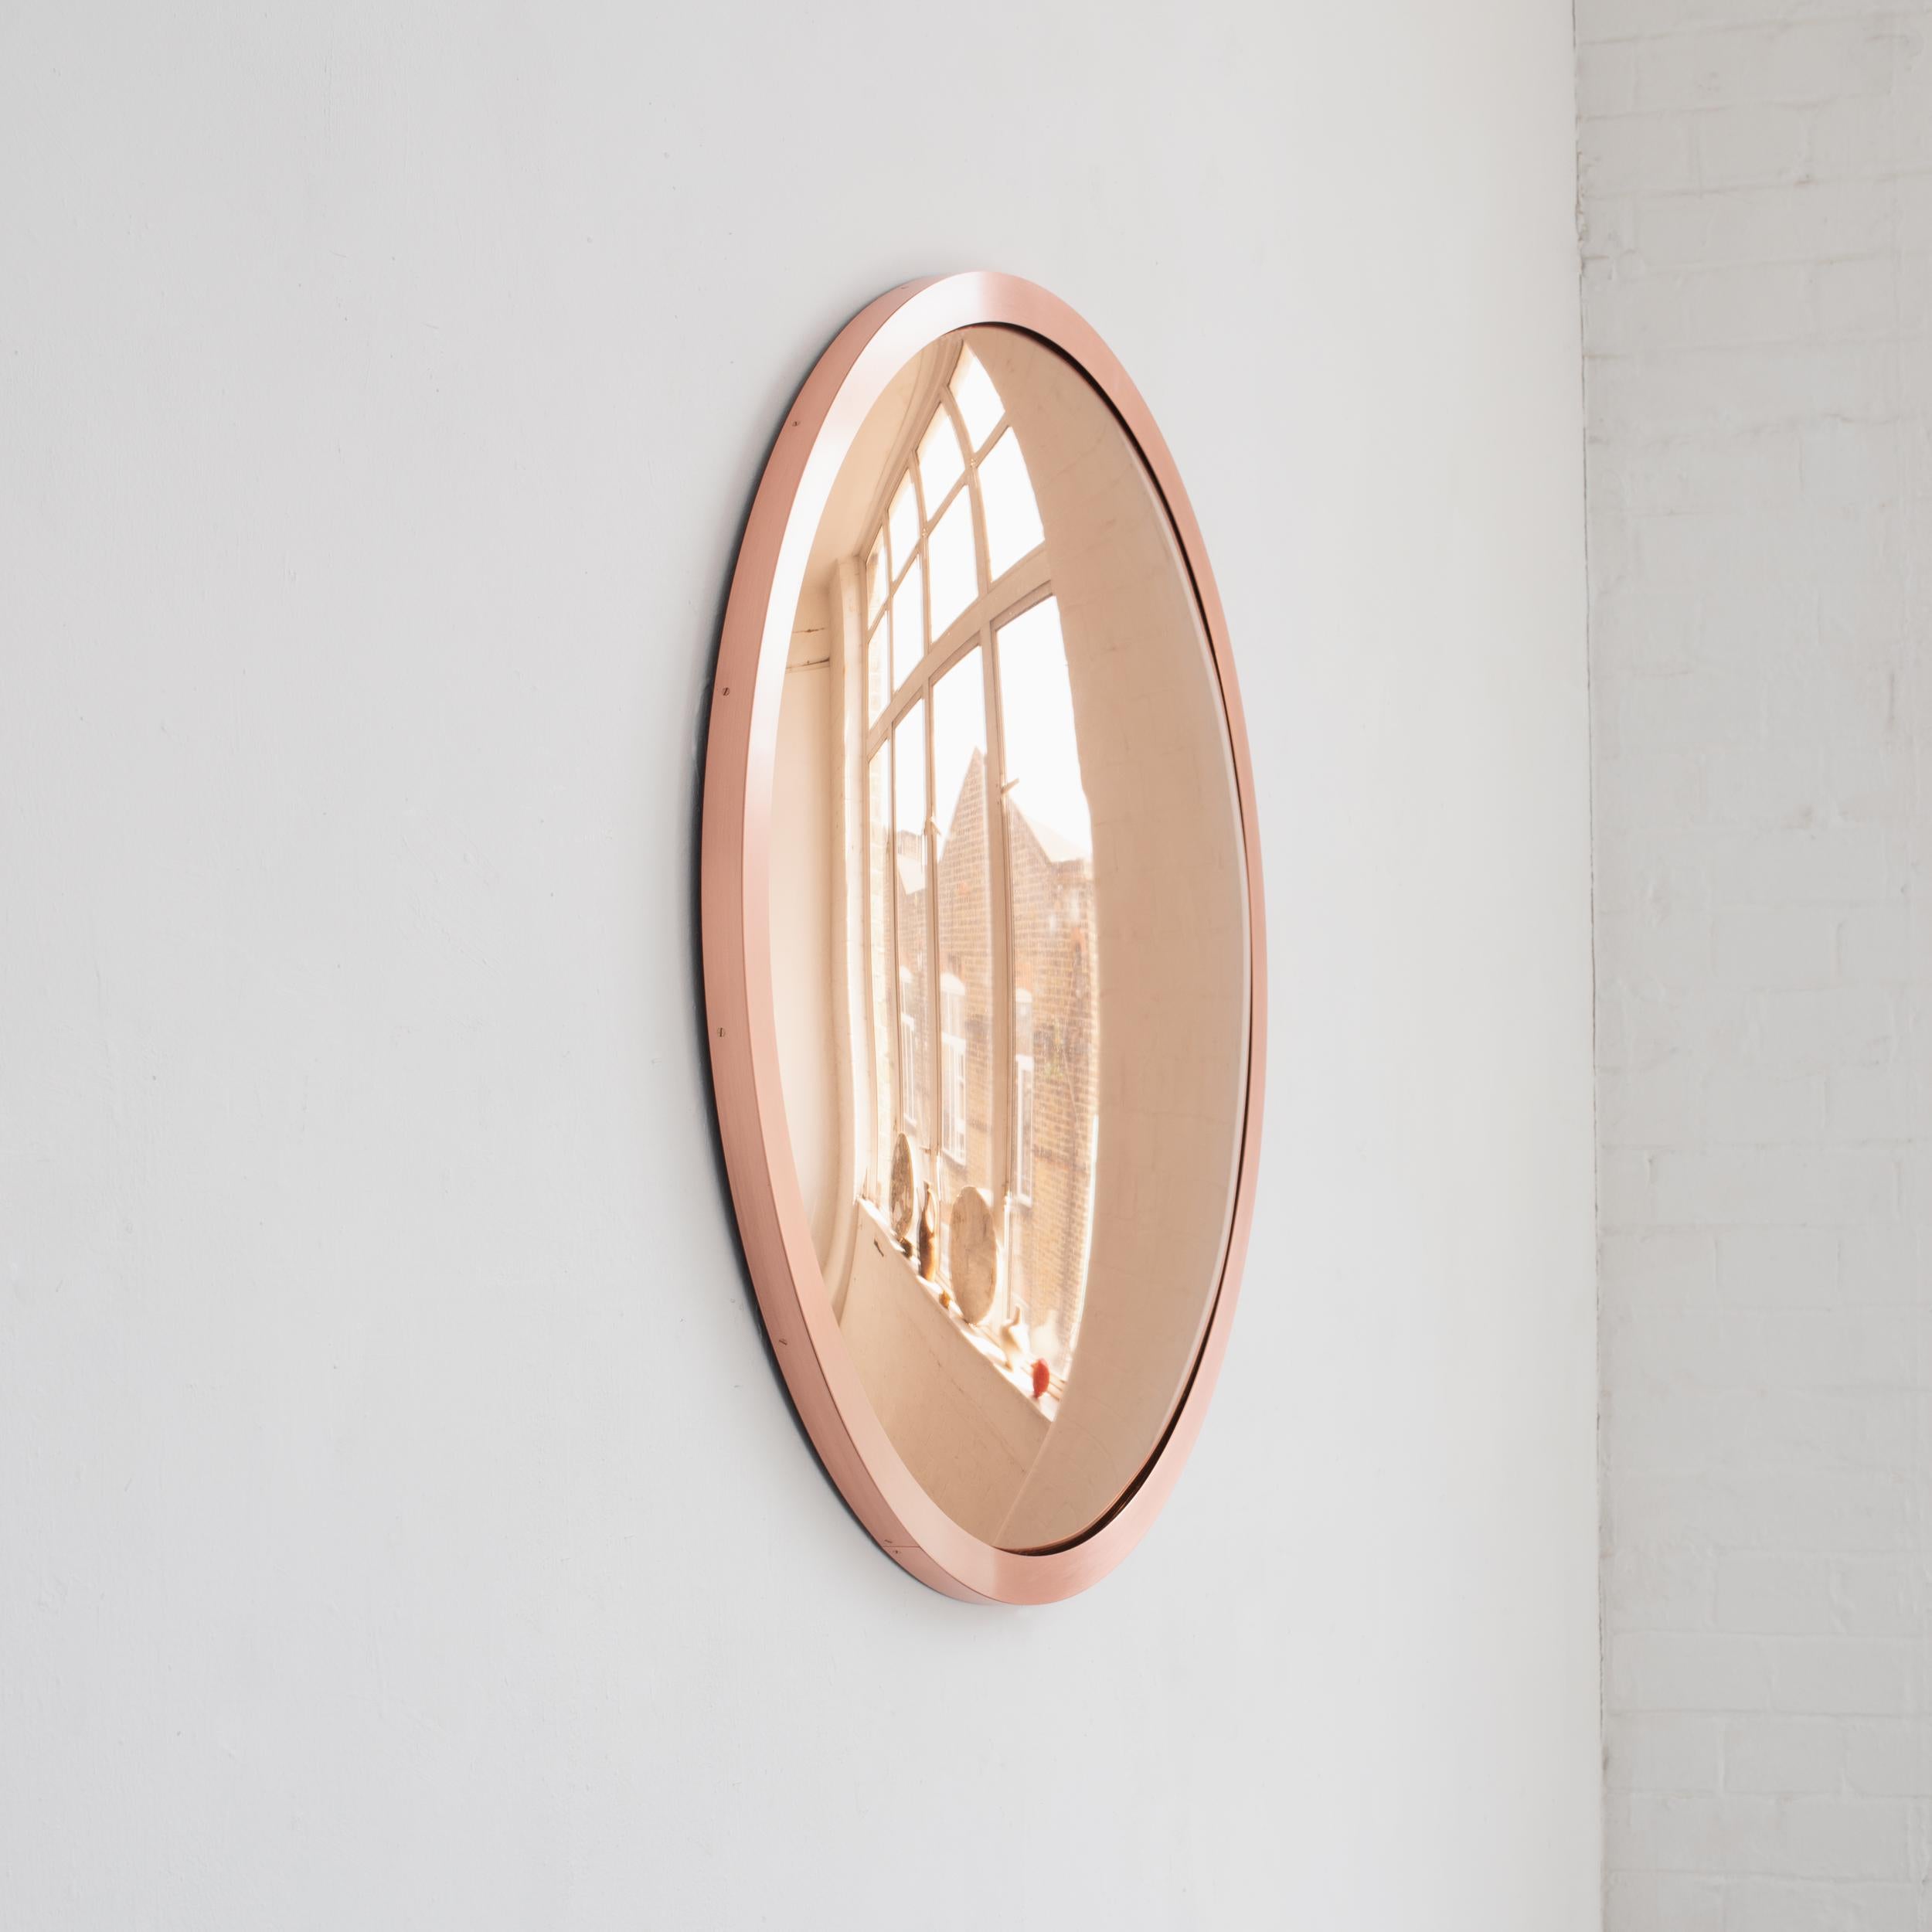 Organic Modern In Stock Orbis Round Rose Gold Tinted Deco Convex Mirror, Copper Frame For Sale